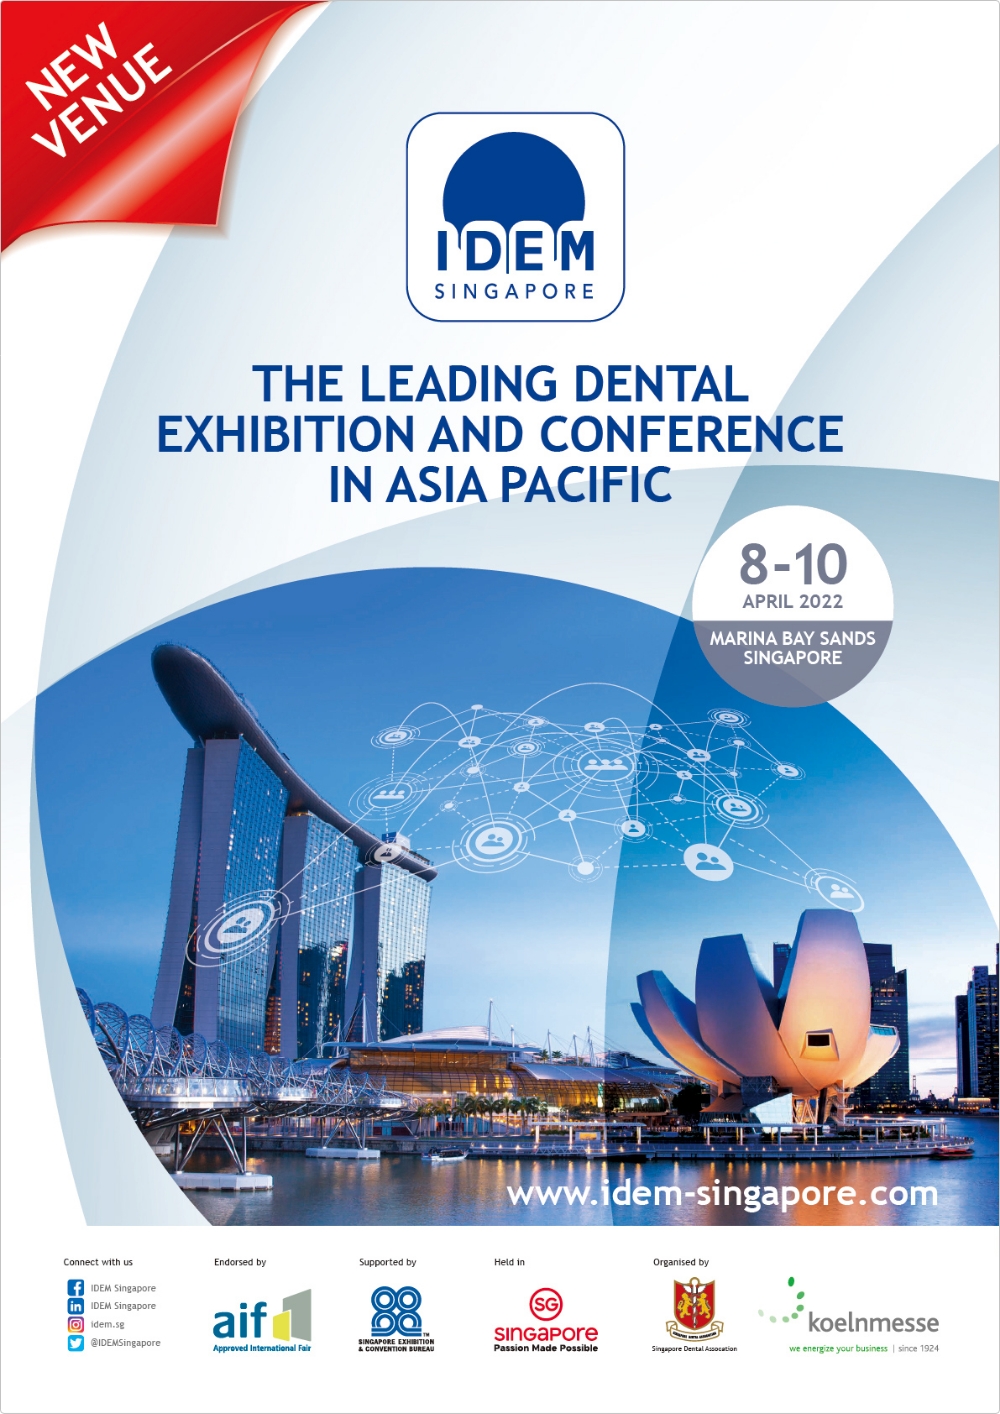 We are exhibiting at IDEM 2022 on 7-9 October.